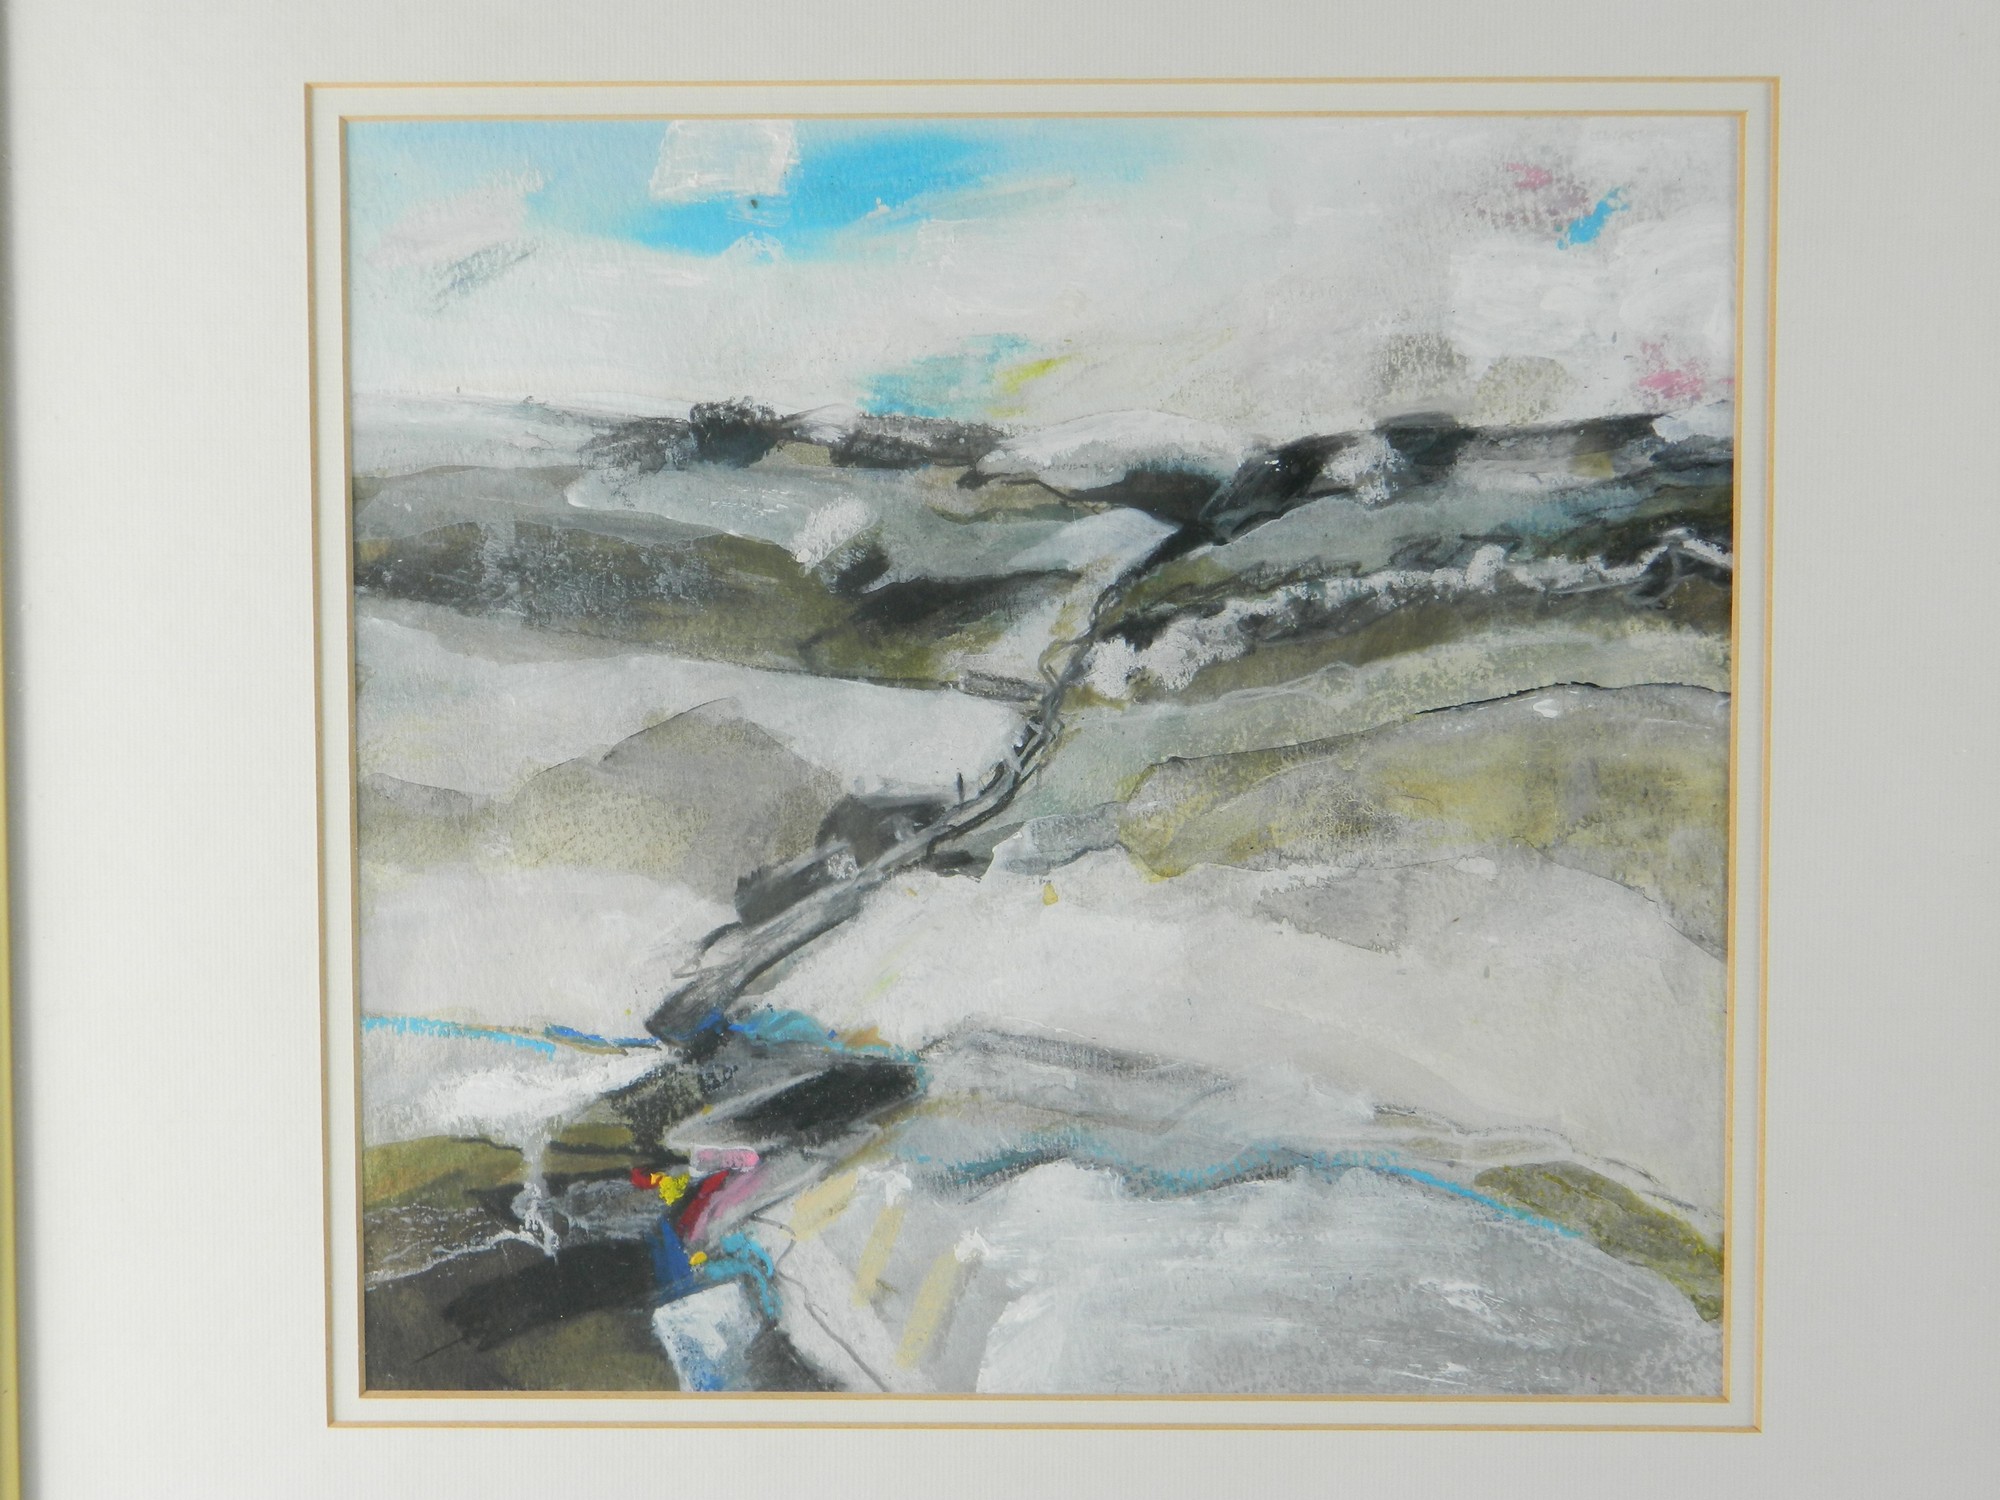 DOUGLAS DAVIES 'Winter' framed mixed media, signature faint dated 1993. Frame 43.5 by 45cm and mount